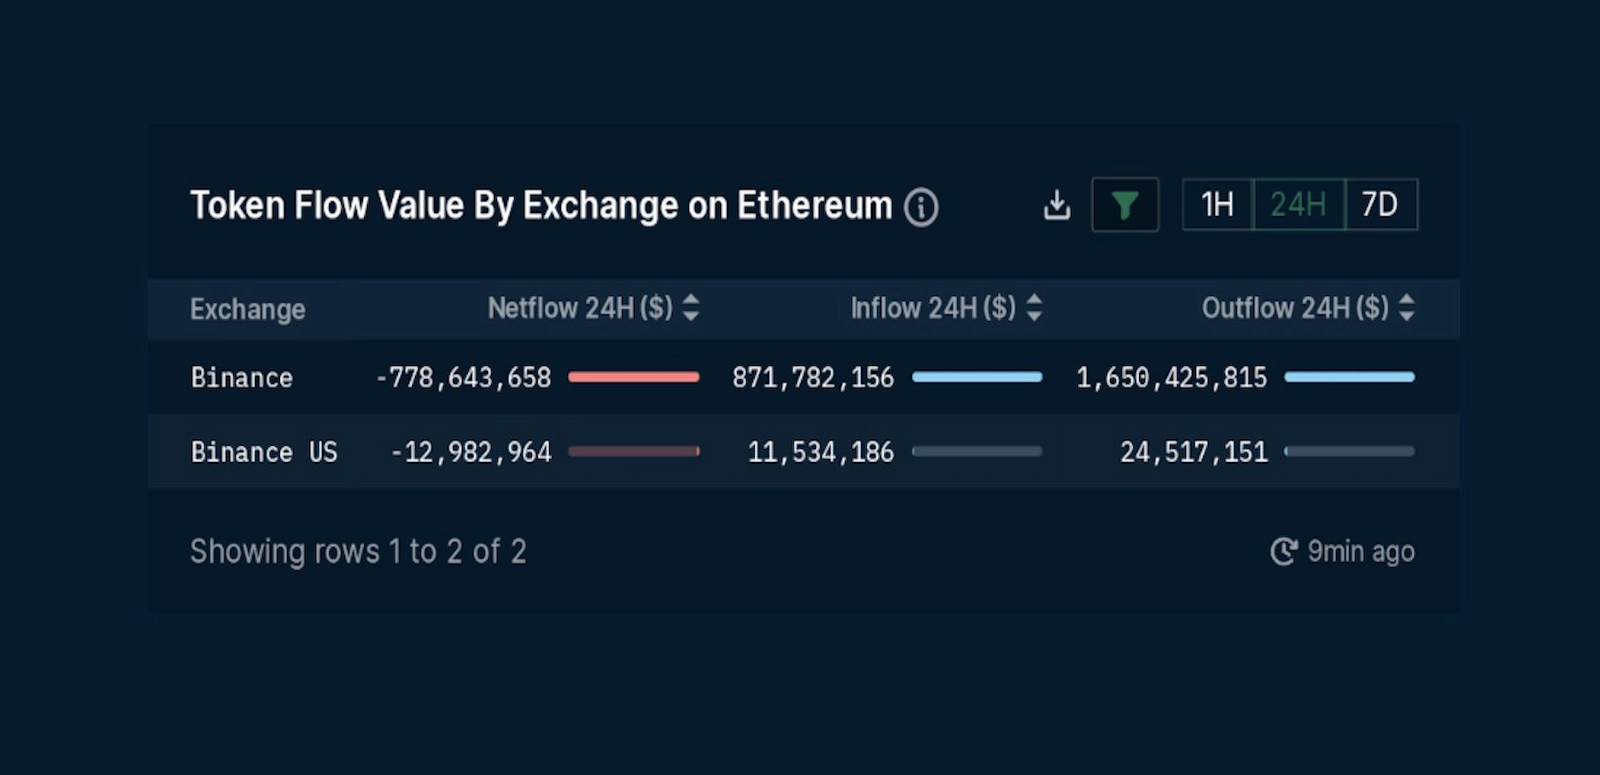 Ethereum outflows outweighed inflows over the past 24 hours.